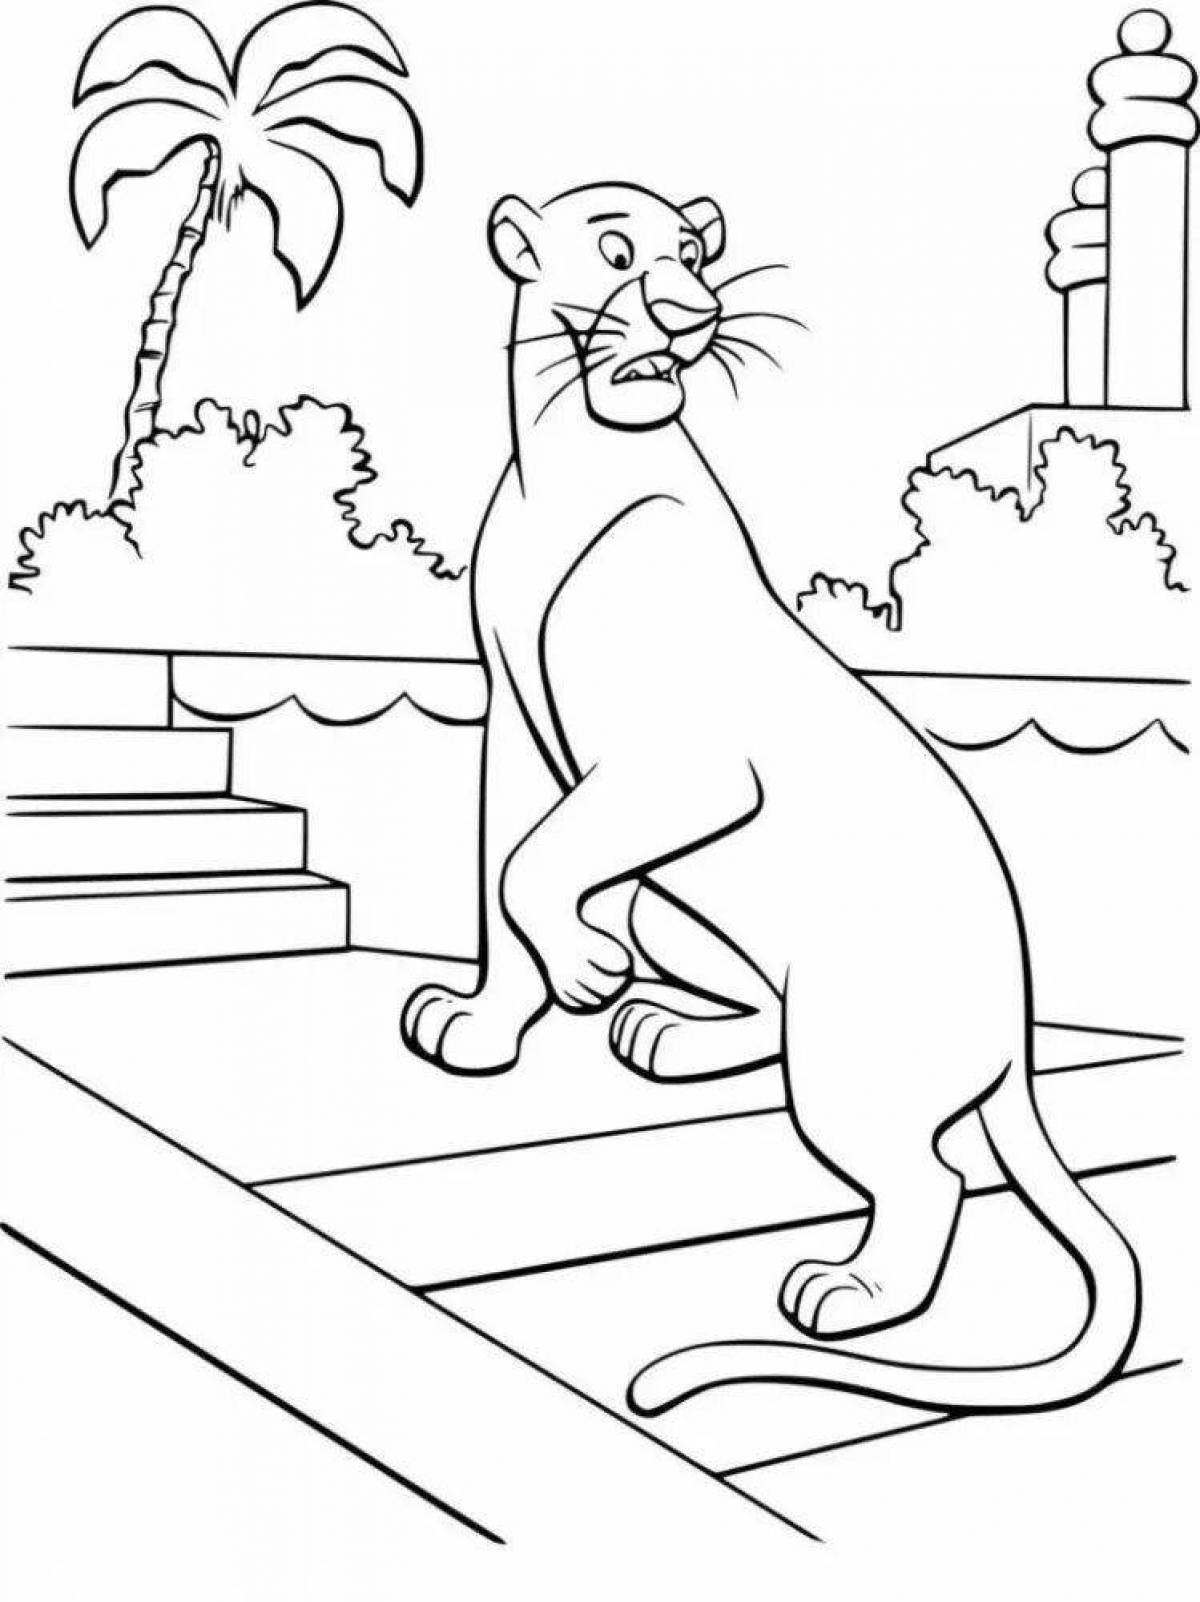 Glorious panther coloring page